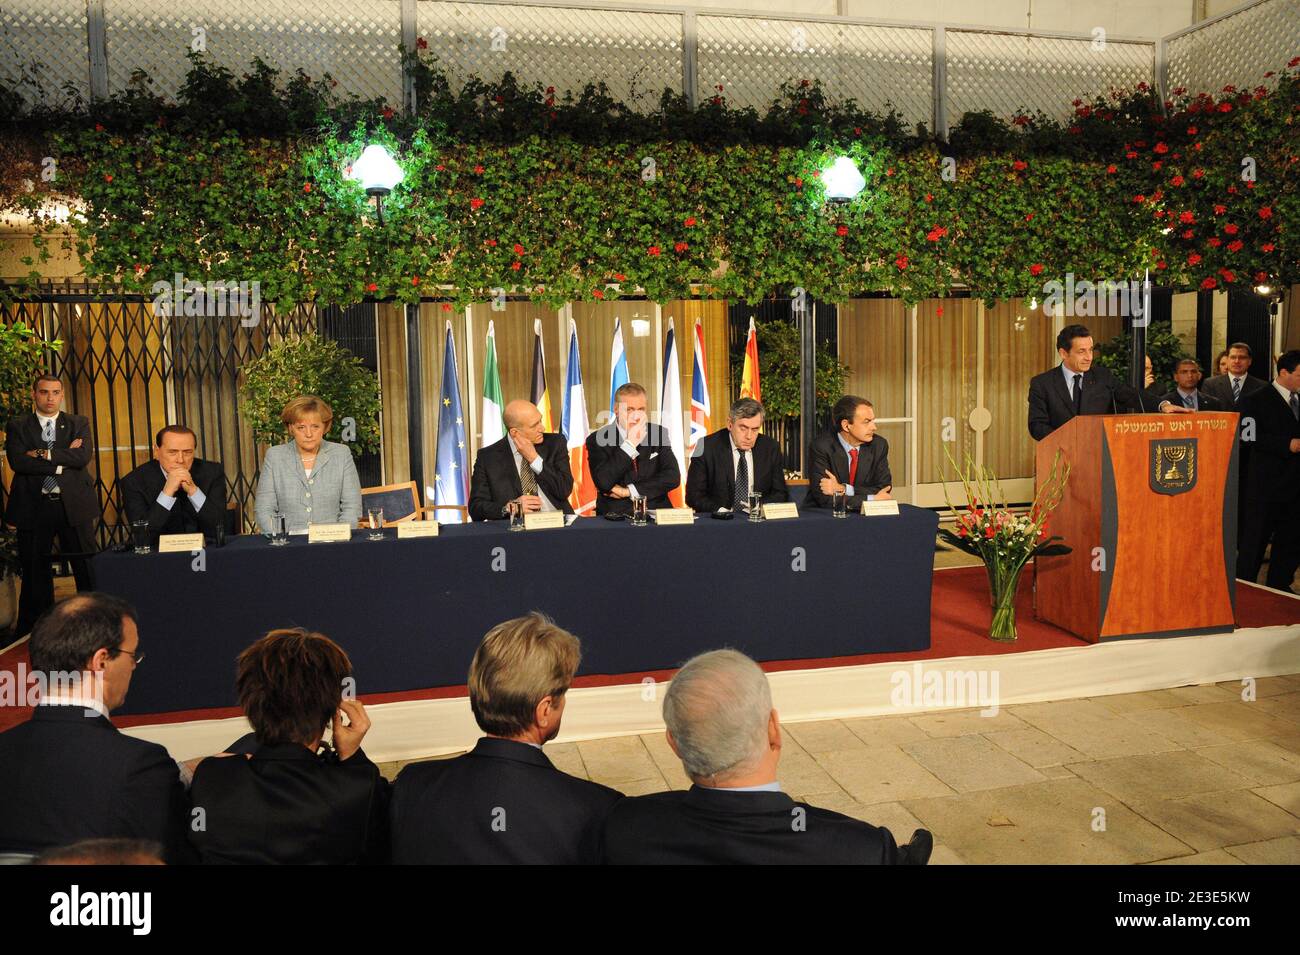 From R : French President Nicolas Sarkozy, Spanish Prime Minister Jose Luis Rodriguez Zapatero, Great Britain's Prime Minister Gordon Brown, Czech Prime Minister Mirek Topolanek, Israeli Prime Minister Ehud Olmert, German Chancellor Angela Merkel and Italian Prime Minister Silvio Berlusconi seen during a joint press conference at the residence of Israeli Prime Minister Ehud Olmert in Jerusalem, Israel on January 18, 2009. Photo by Ammar Abd Rabbo/ABACAPRESS.COM Stock Photo